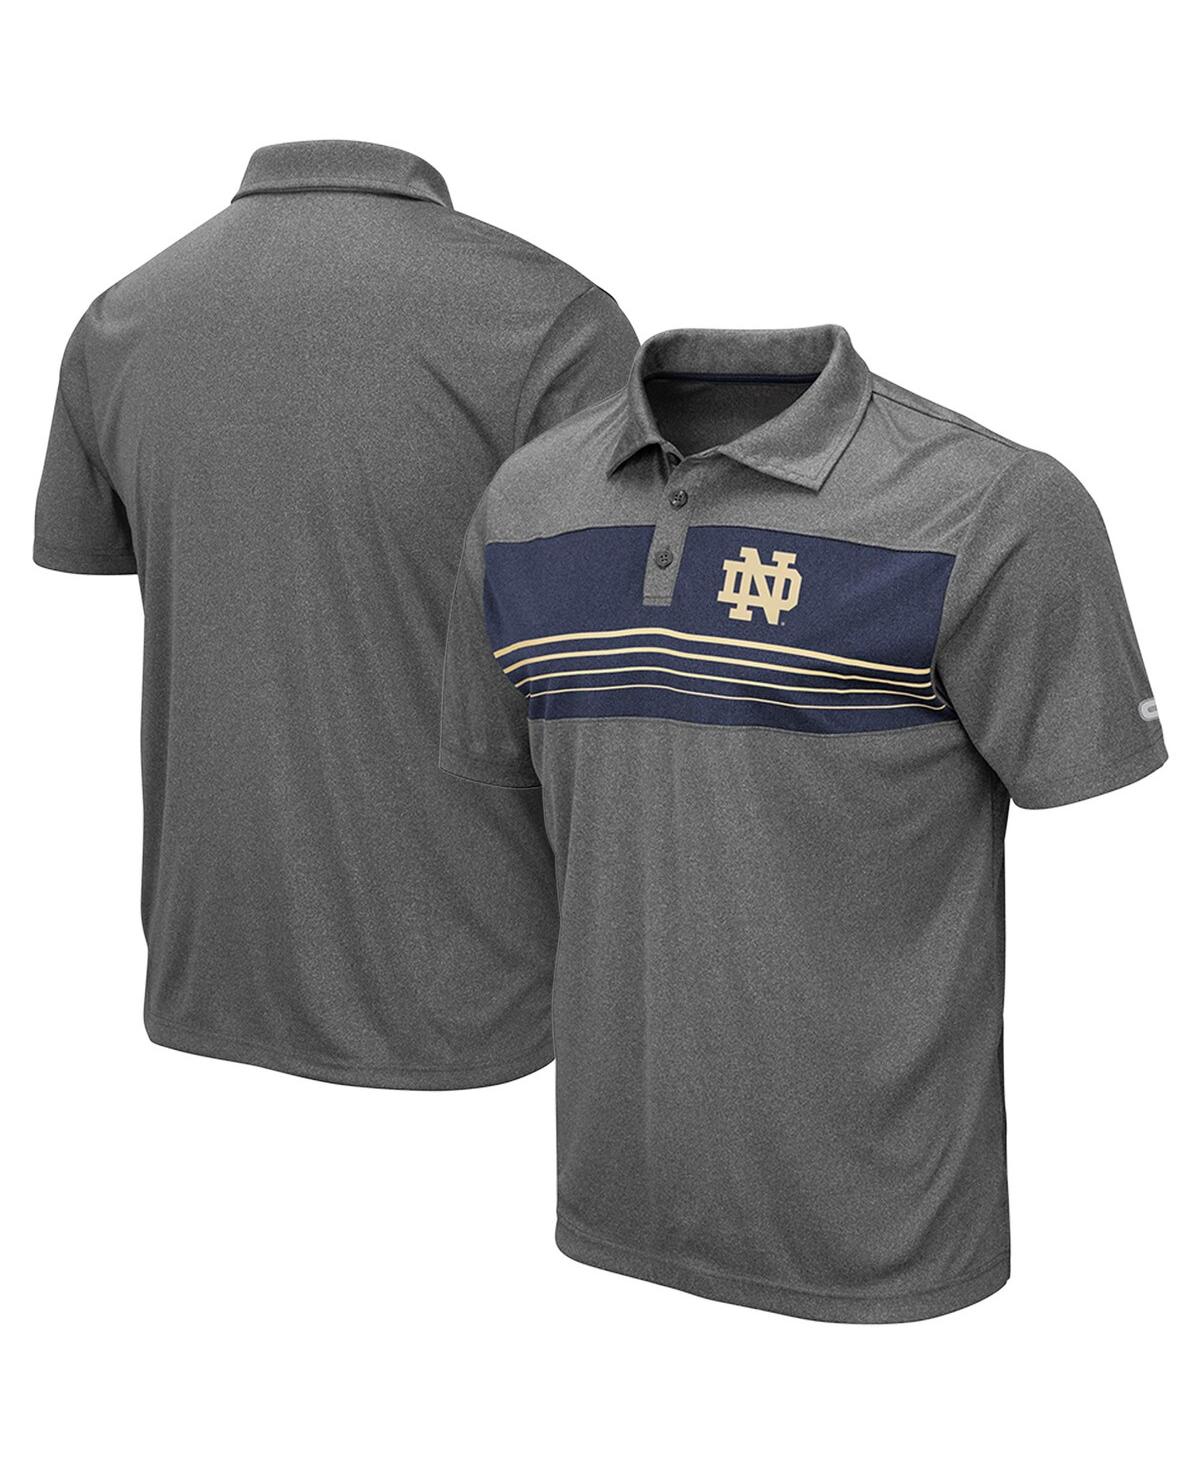 Colosseum Men's  Heathered Charcoal Notre Dame Fighting Irish Team Smithers Polo Shirt